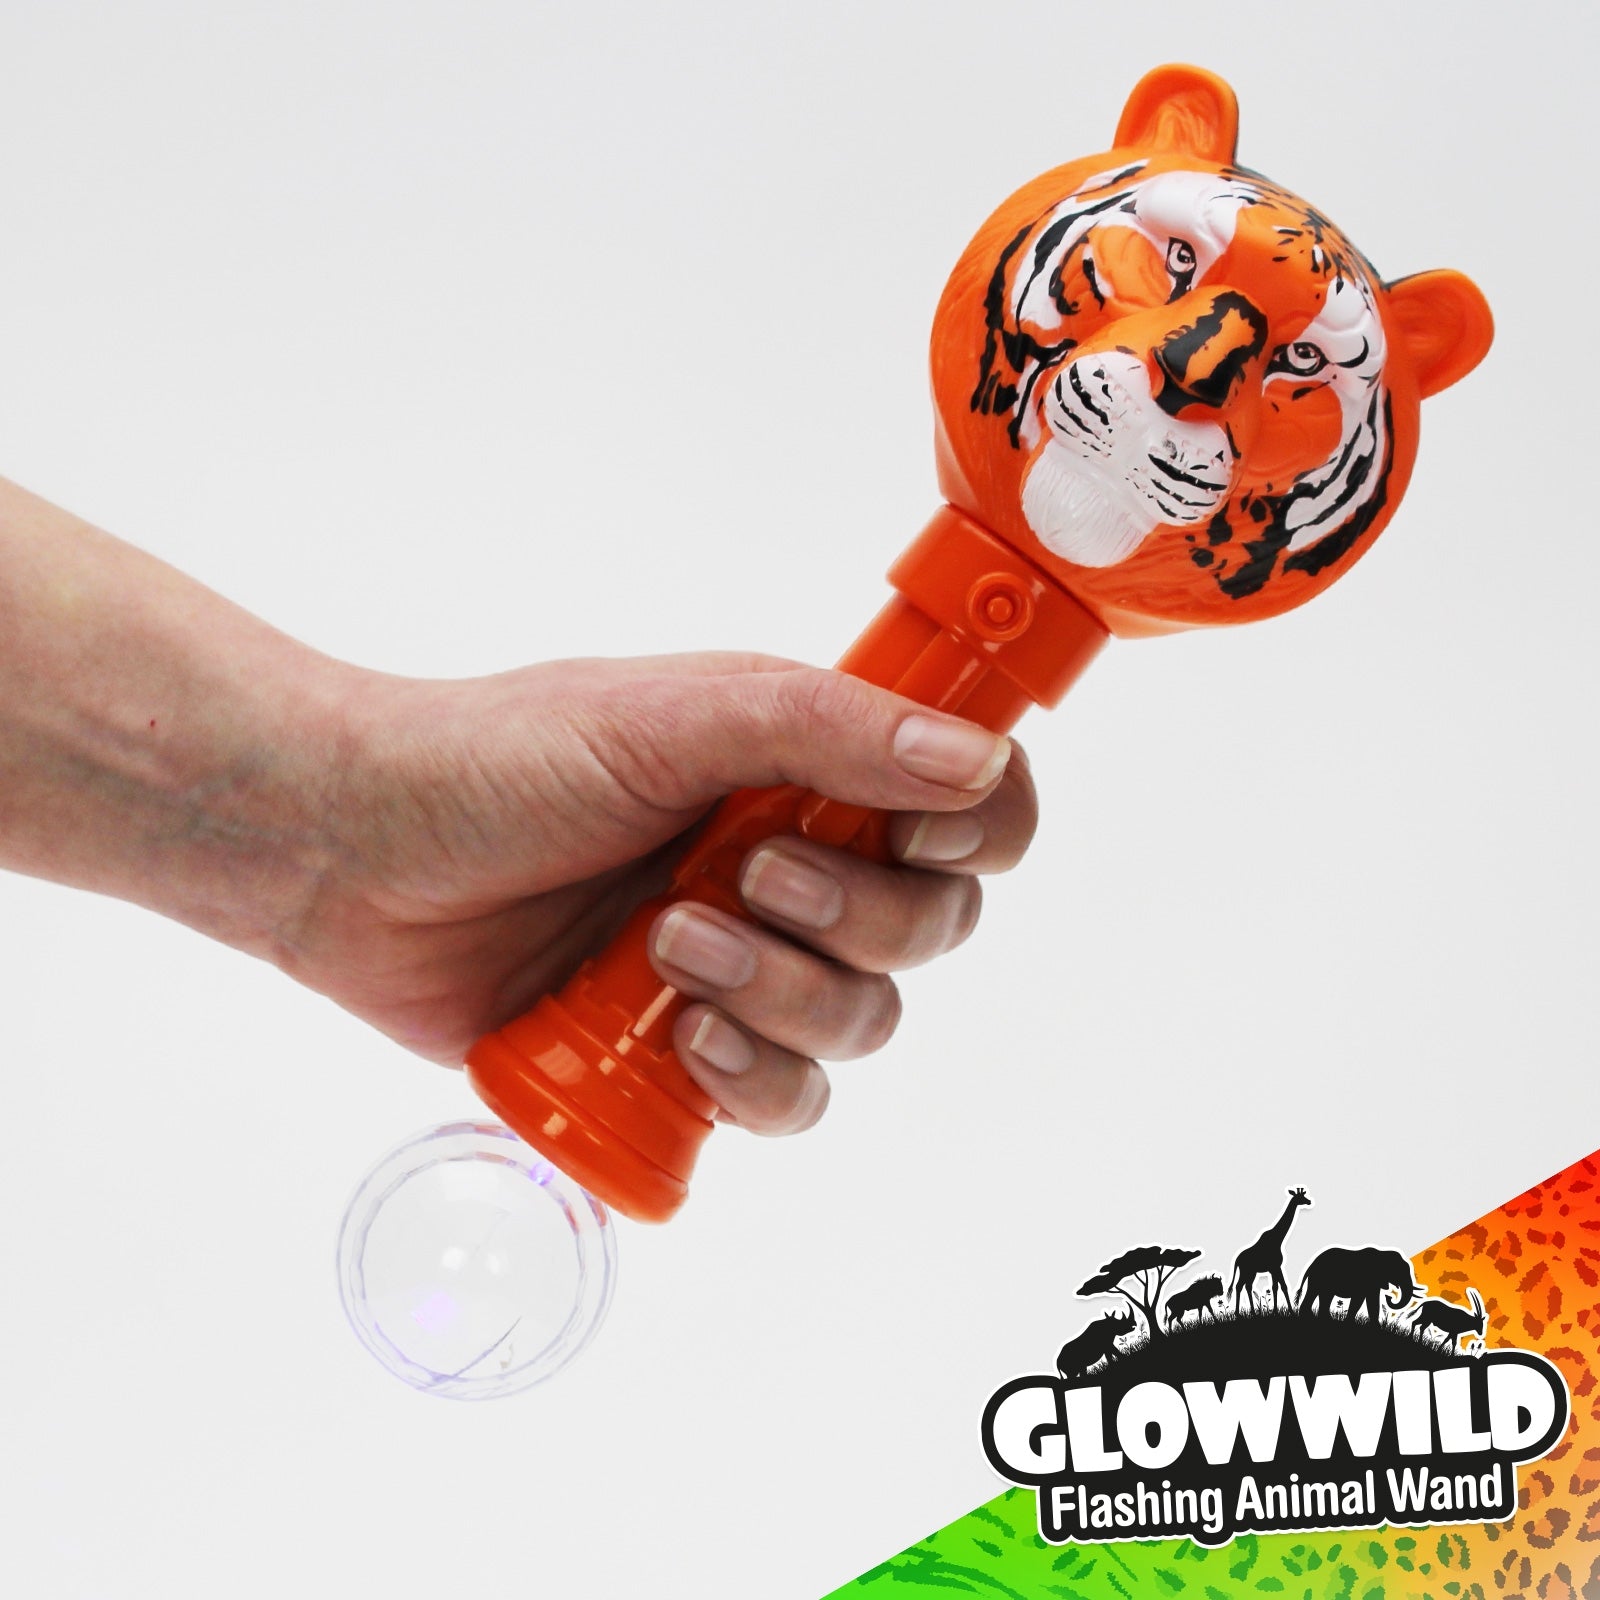 Tiger Mega Light Up Animal Wand 11", Tiger, tiger burning bright! This funky tiger wand shines very brightly with multi coloured, multi function LEDs! A large wand measuring 11" long, this colourful baton is topped with a proud tiger head that illuminates and shines through a loop of incredible colour change effects! With a simple on/of function, this funky tiger wand is finished with a disco ball at the base that projects colour flash effects onto surrounding surfaces ramping up the fun factor! Tiger Mega 